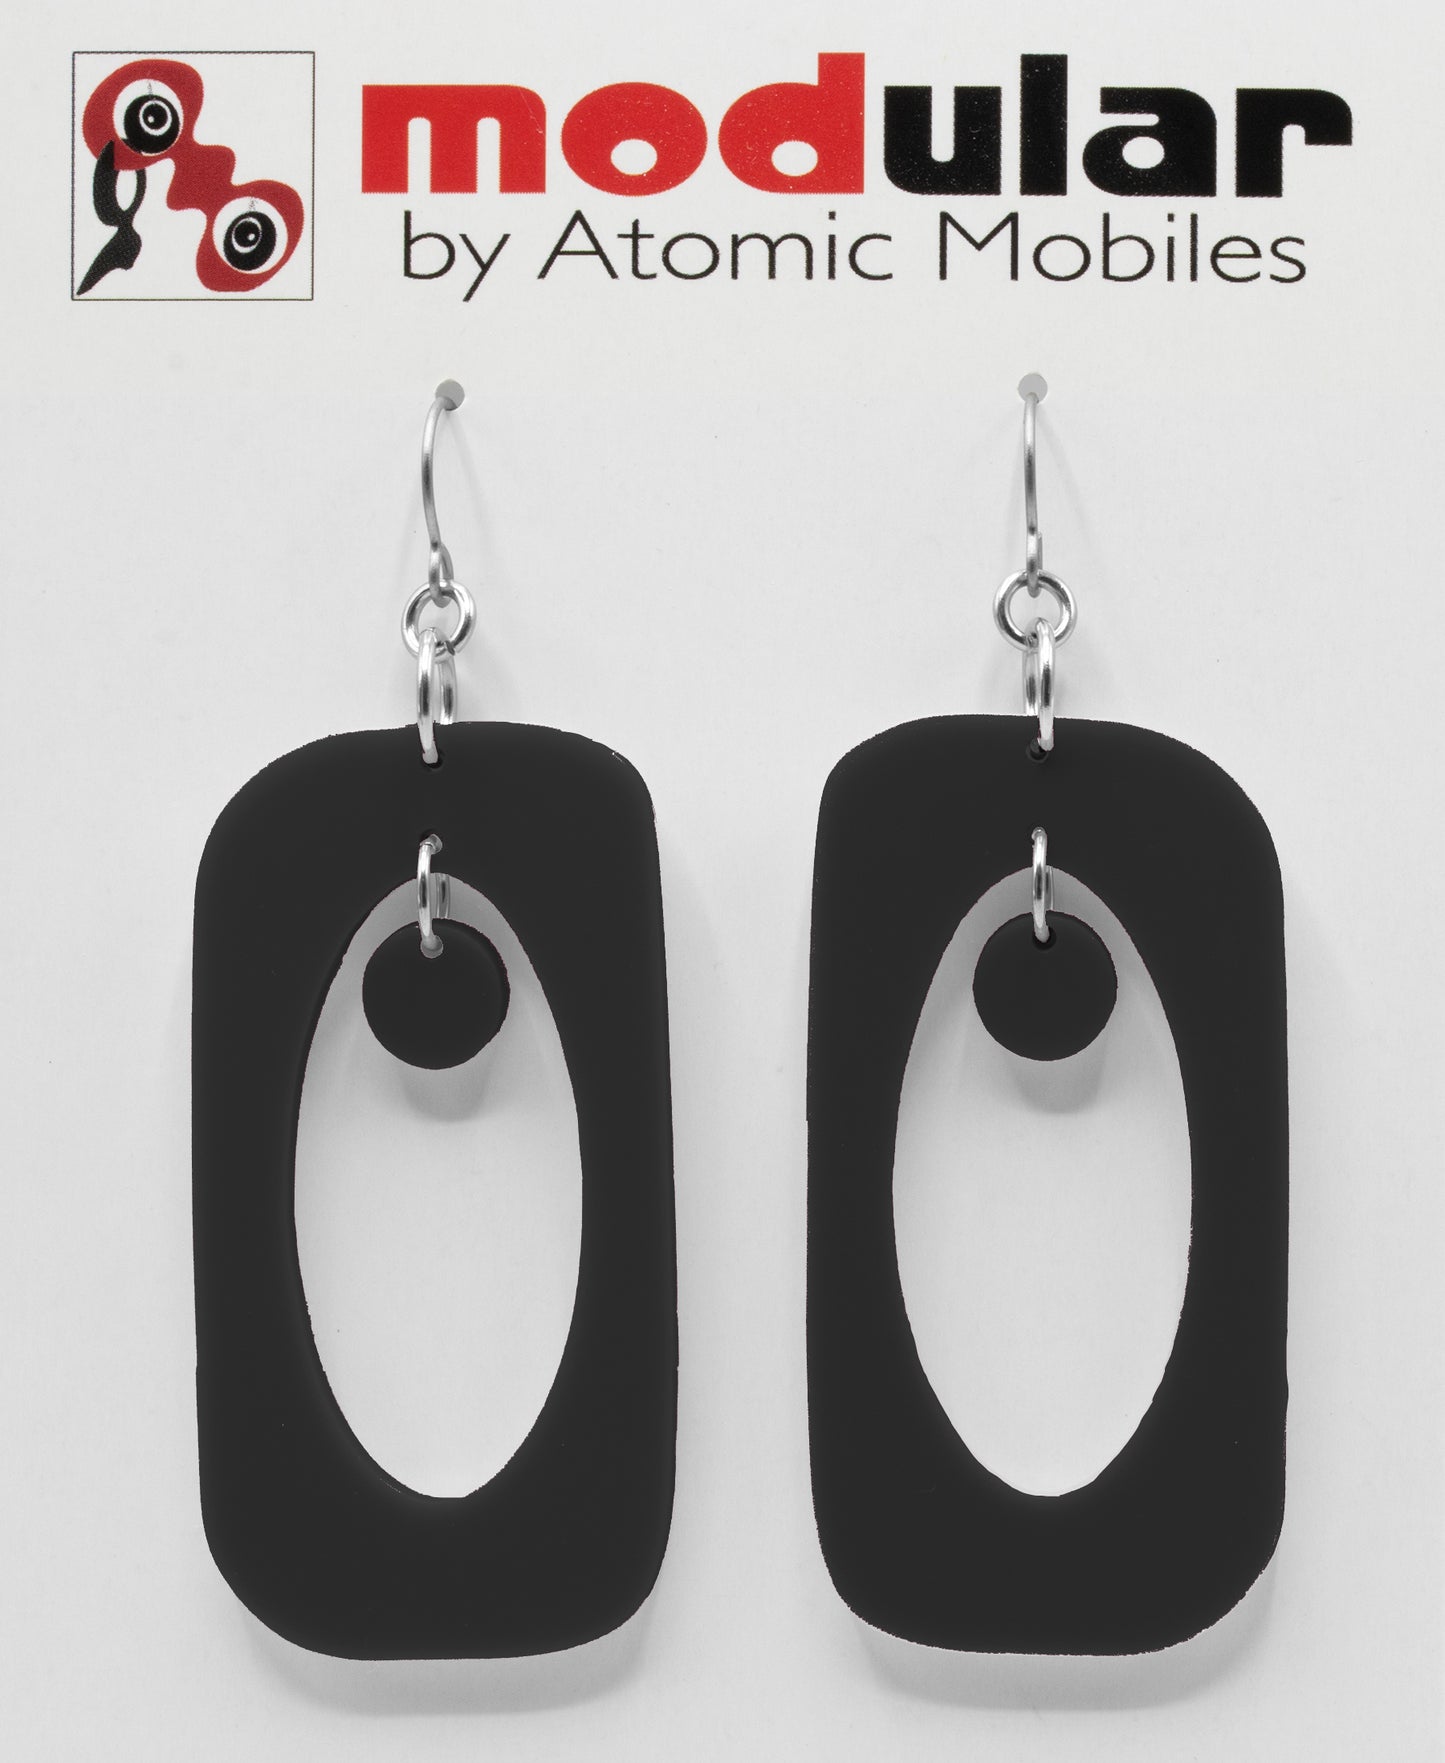 Beatnik Boho Atomic Earrings in Black by AtomicMobiles.com in Bewitching Black - mod retro midcentury inspired jewelry